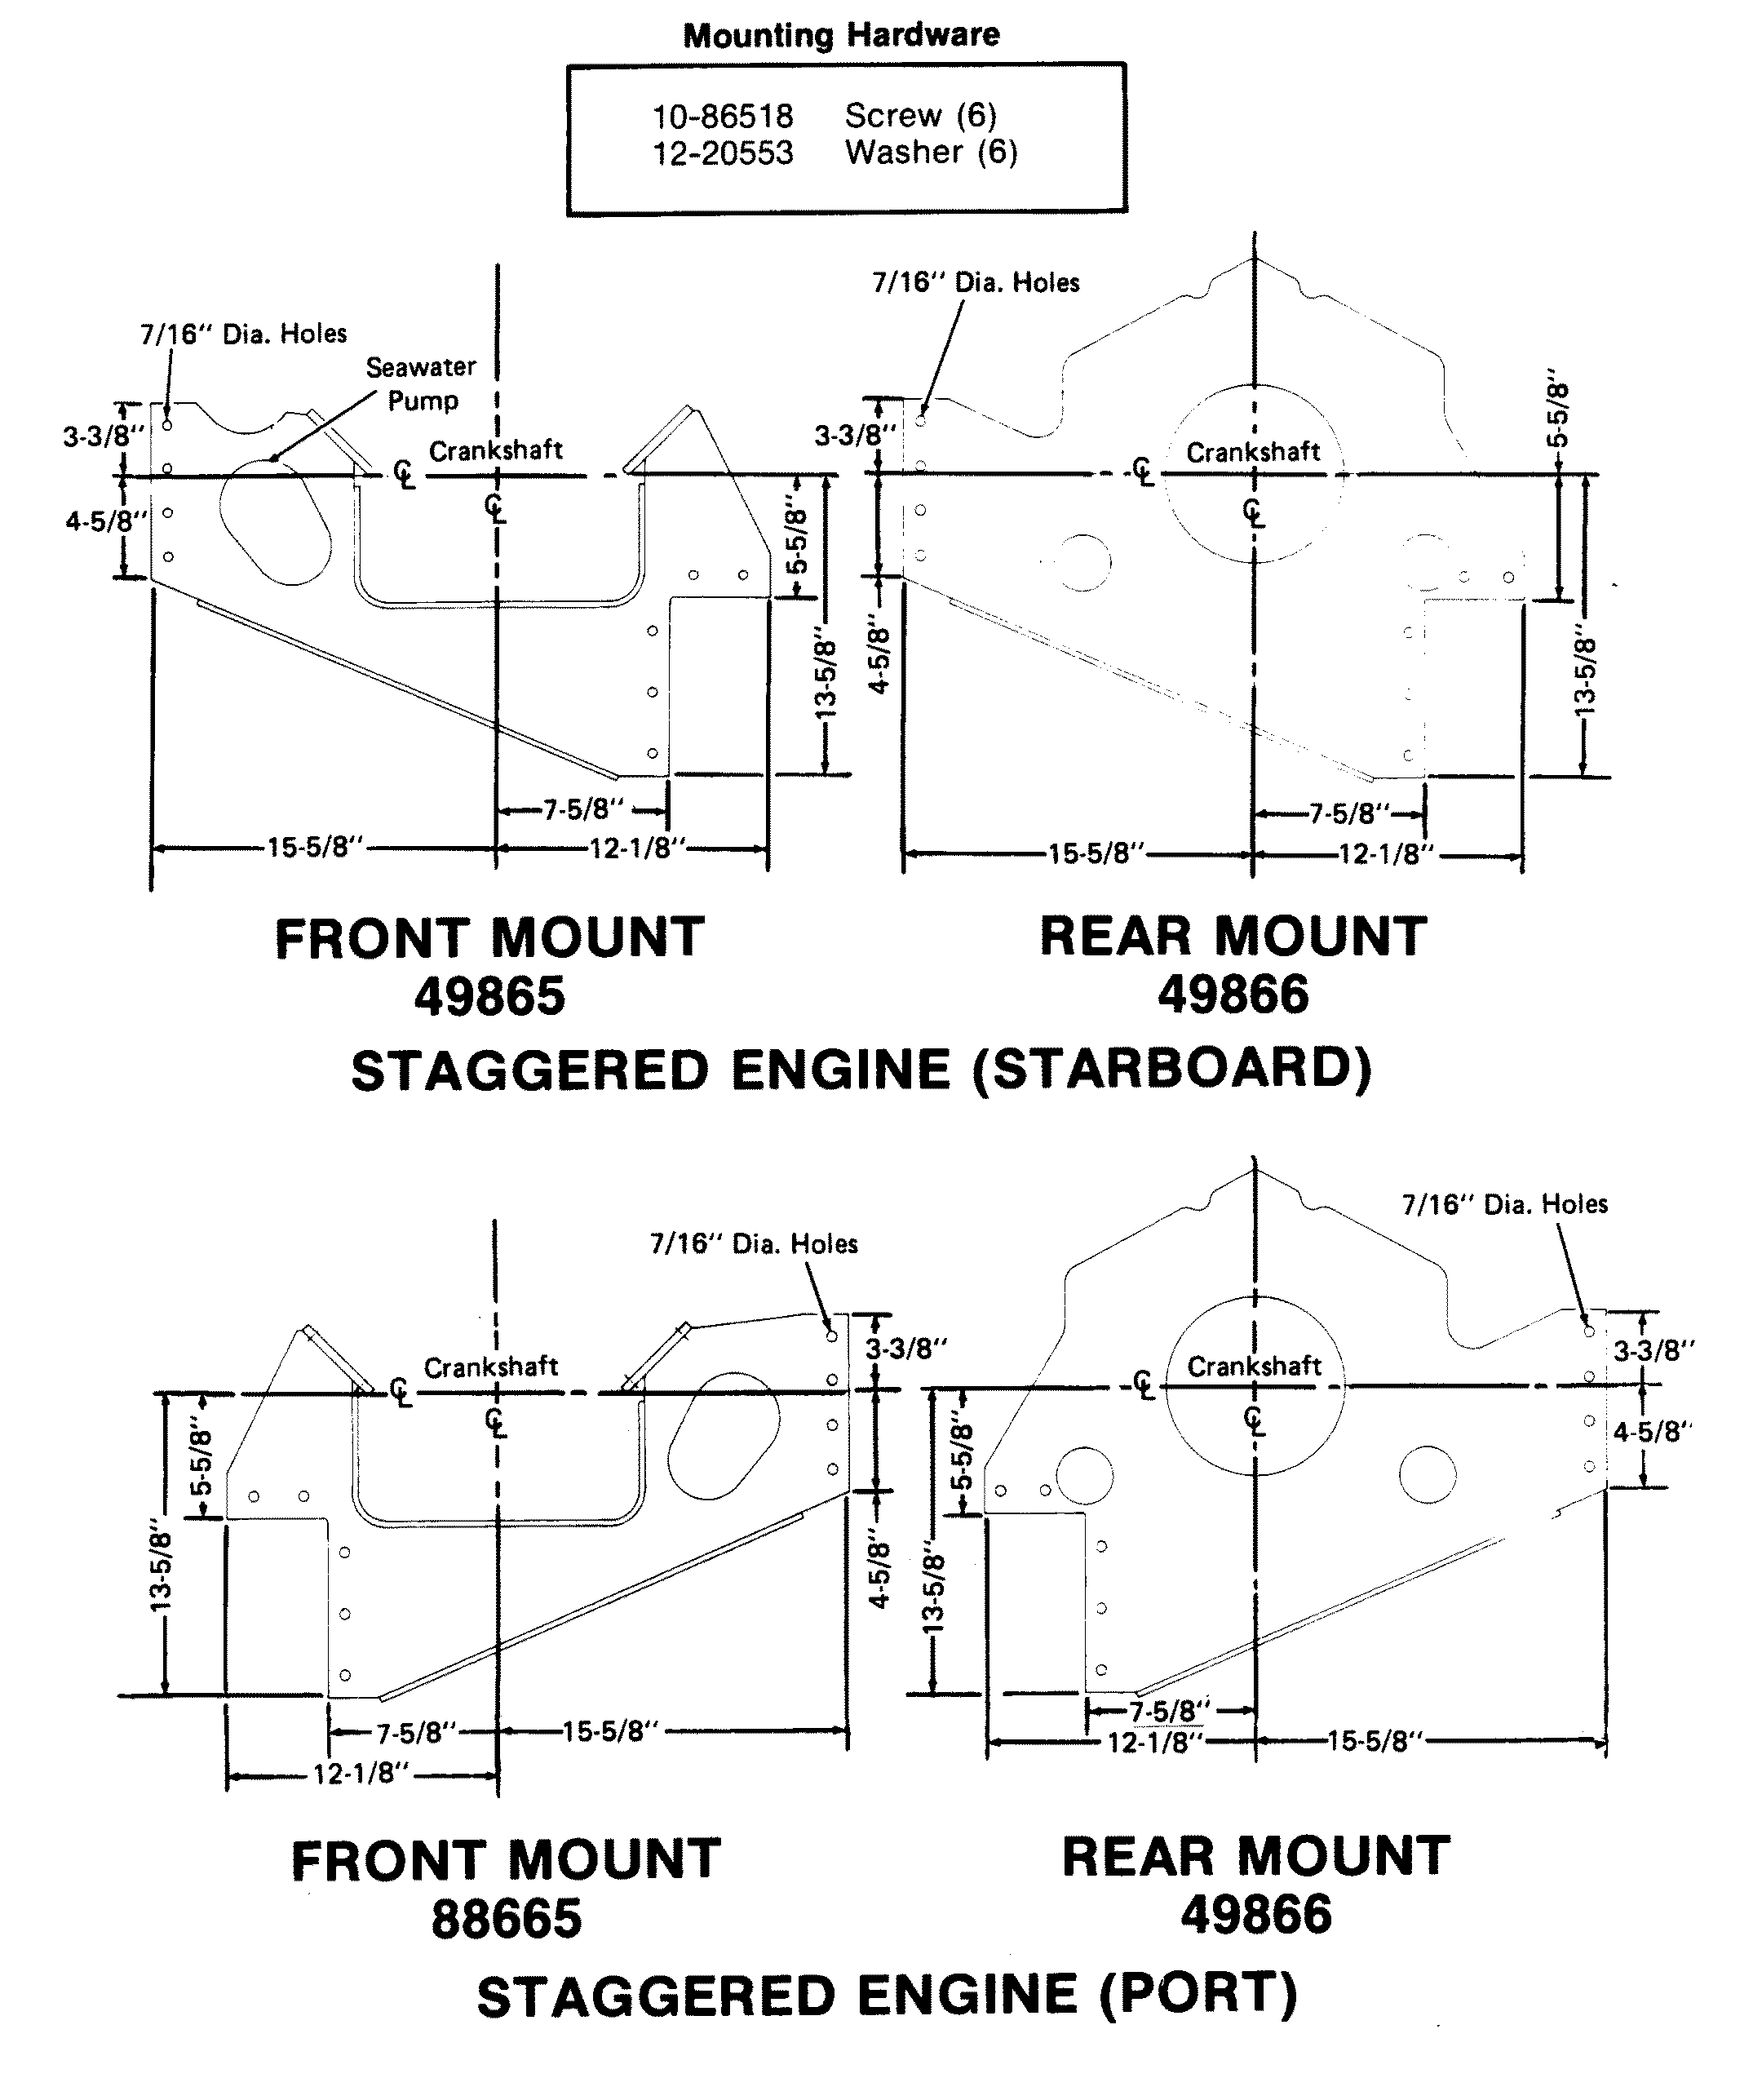 MOUNTING PLATES (STAGGERED ENGINE PORT)